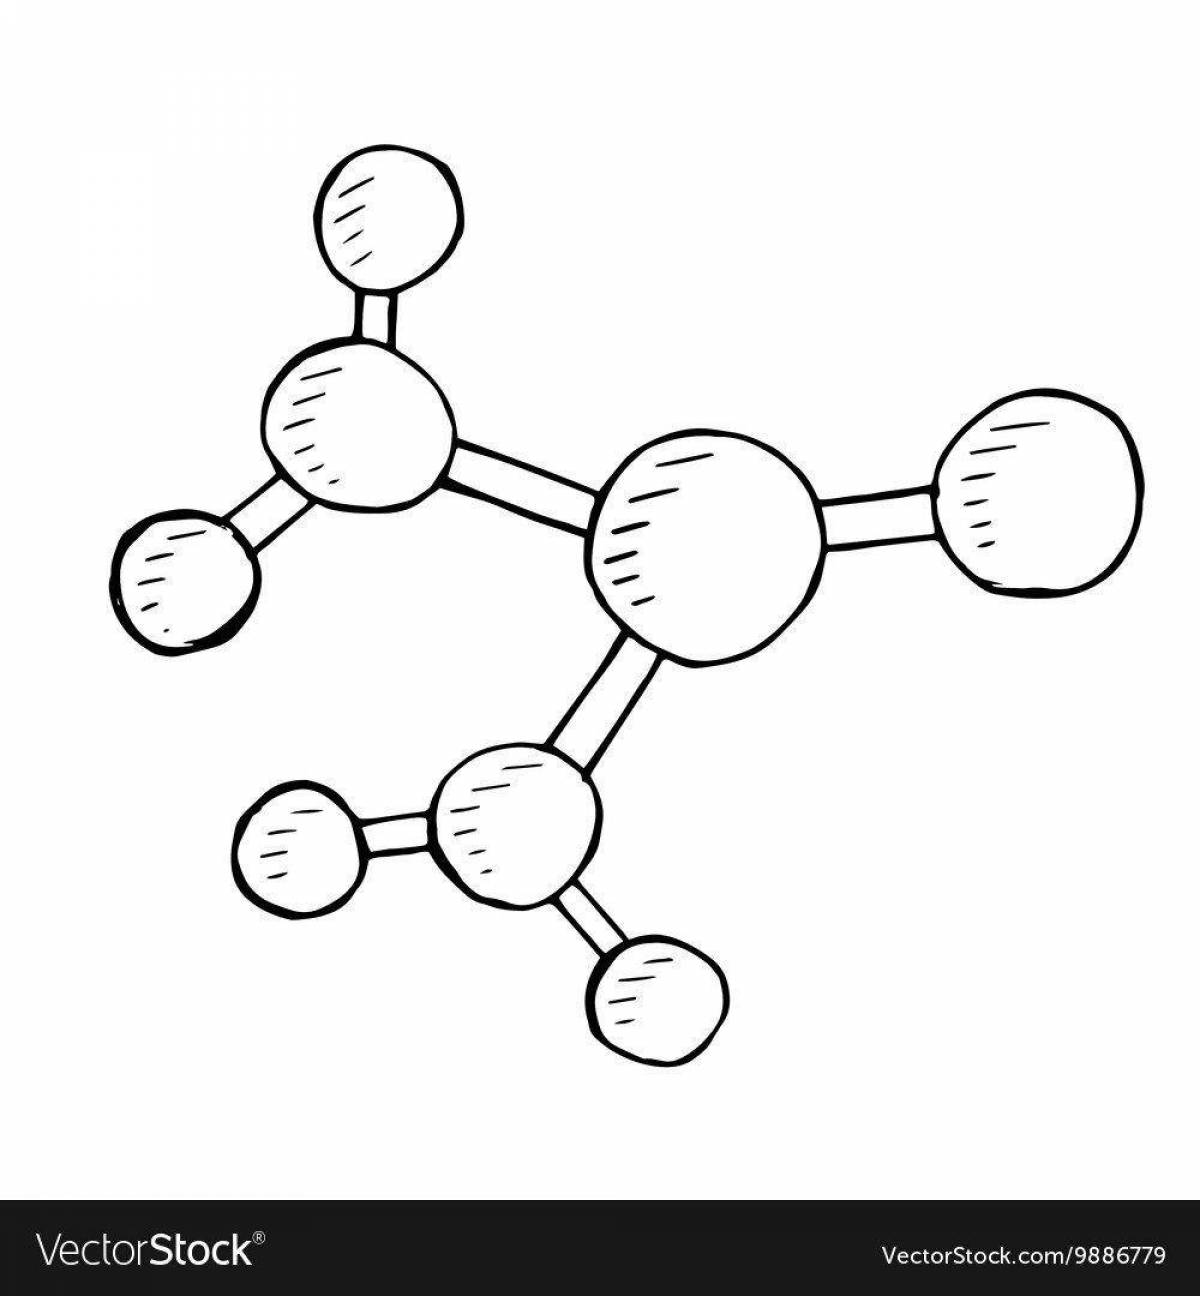 Coloring page inviting water molecule